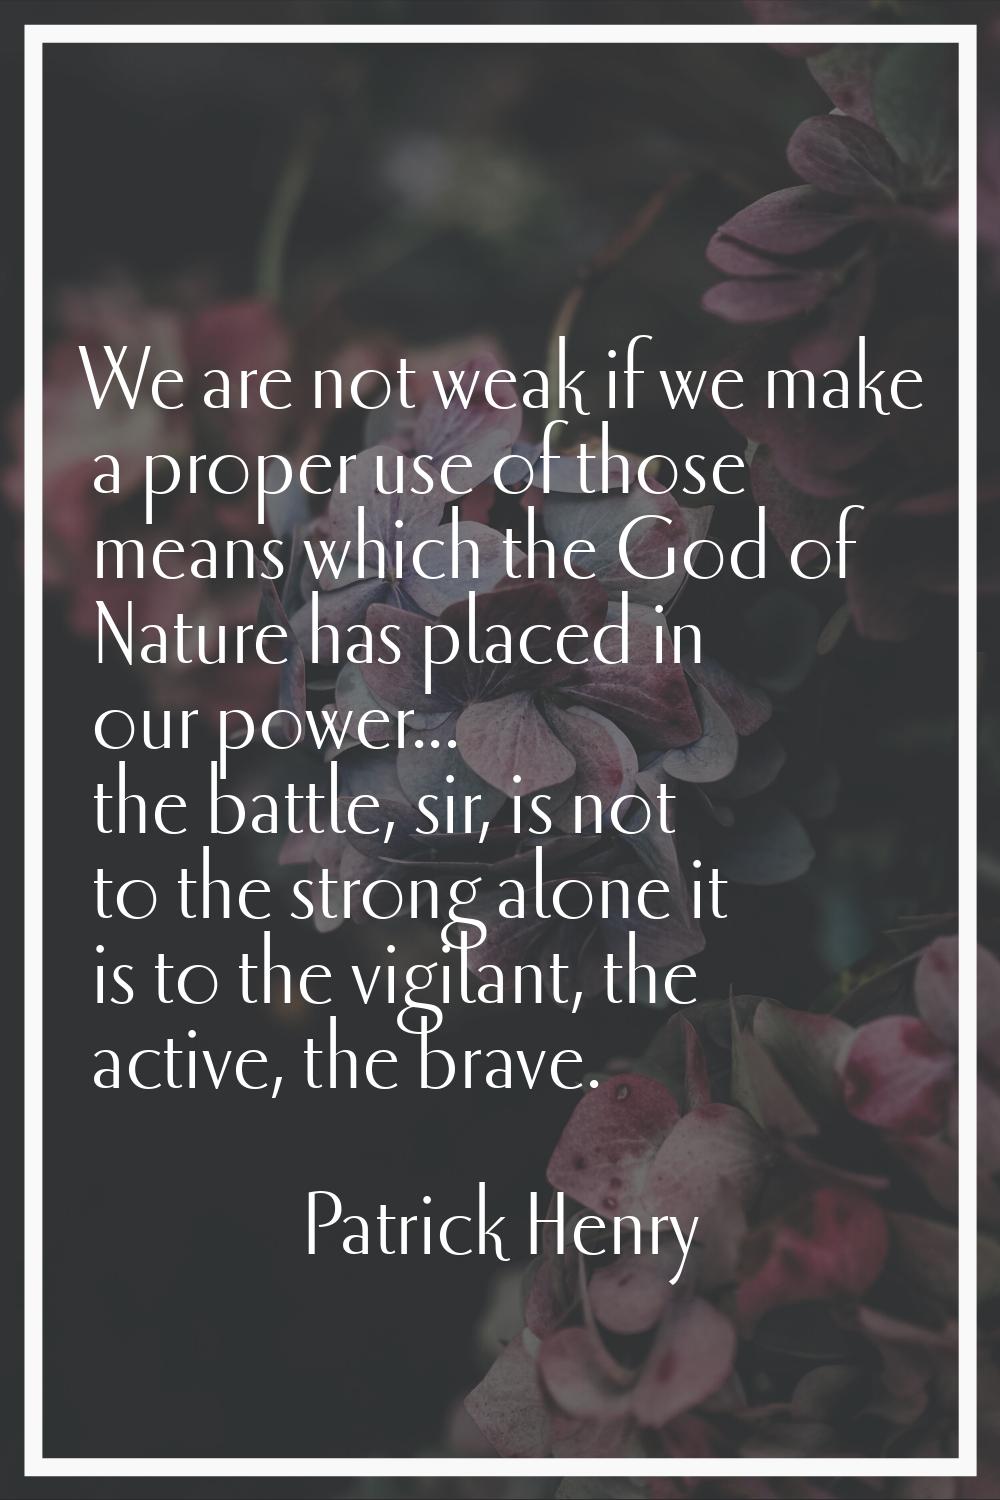 We are not weak if we make a proper use of those means which the God of Nature has placed in our po